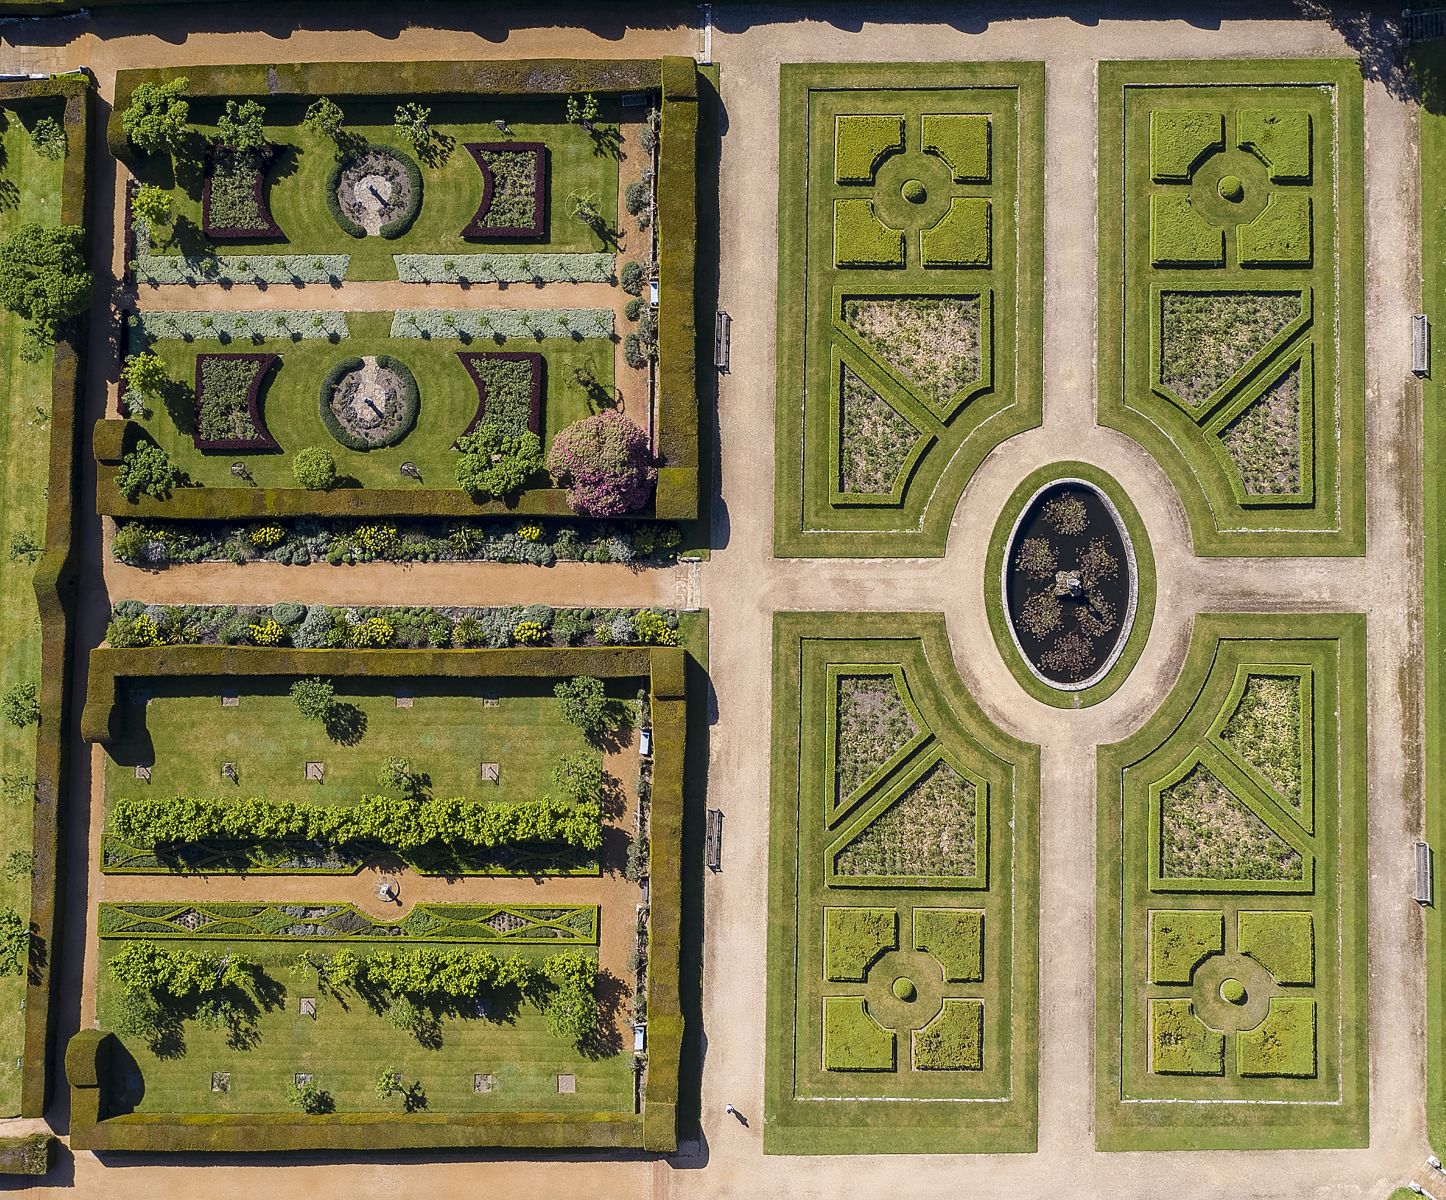 © Ollie Dixon A drone image of the Walled Garden at Penshurst Place